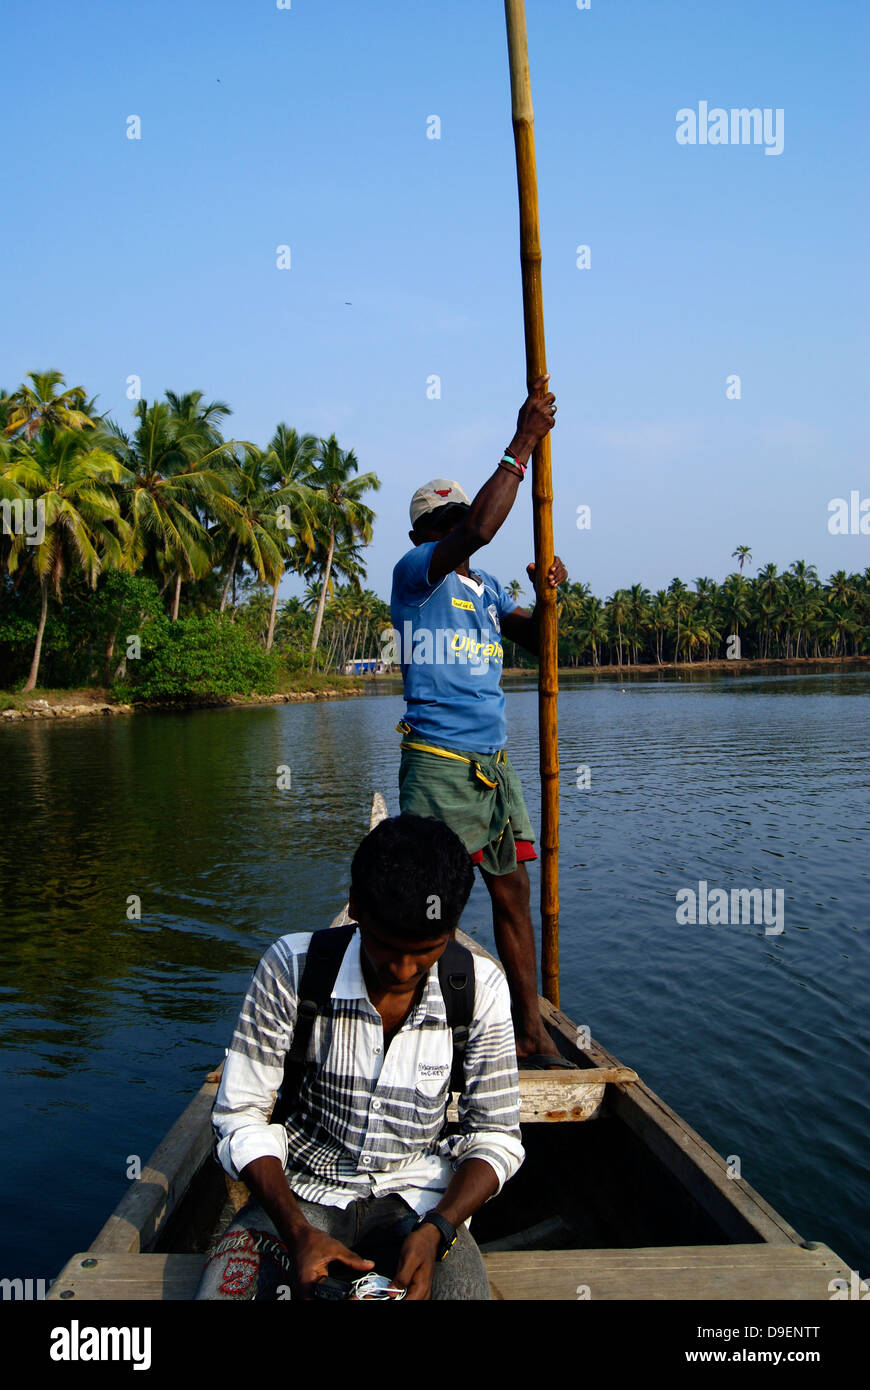 Canoe Boat Journey through the Backwaters of Kerala at Rural village area India Stock Photo